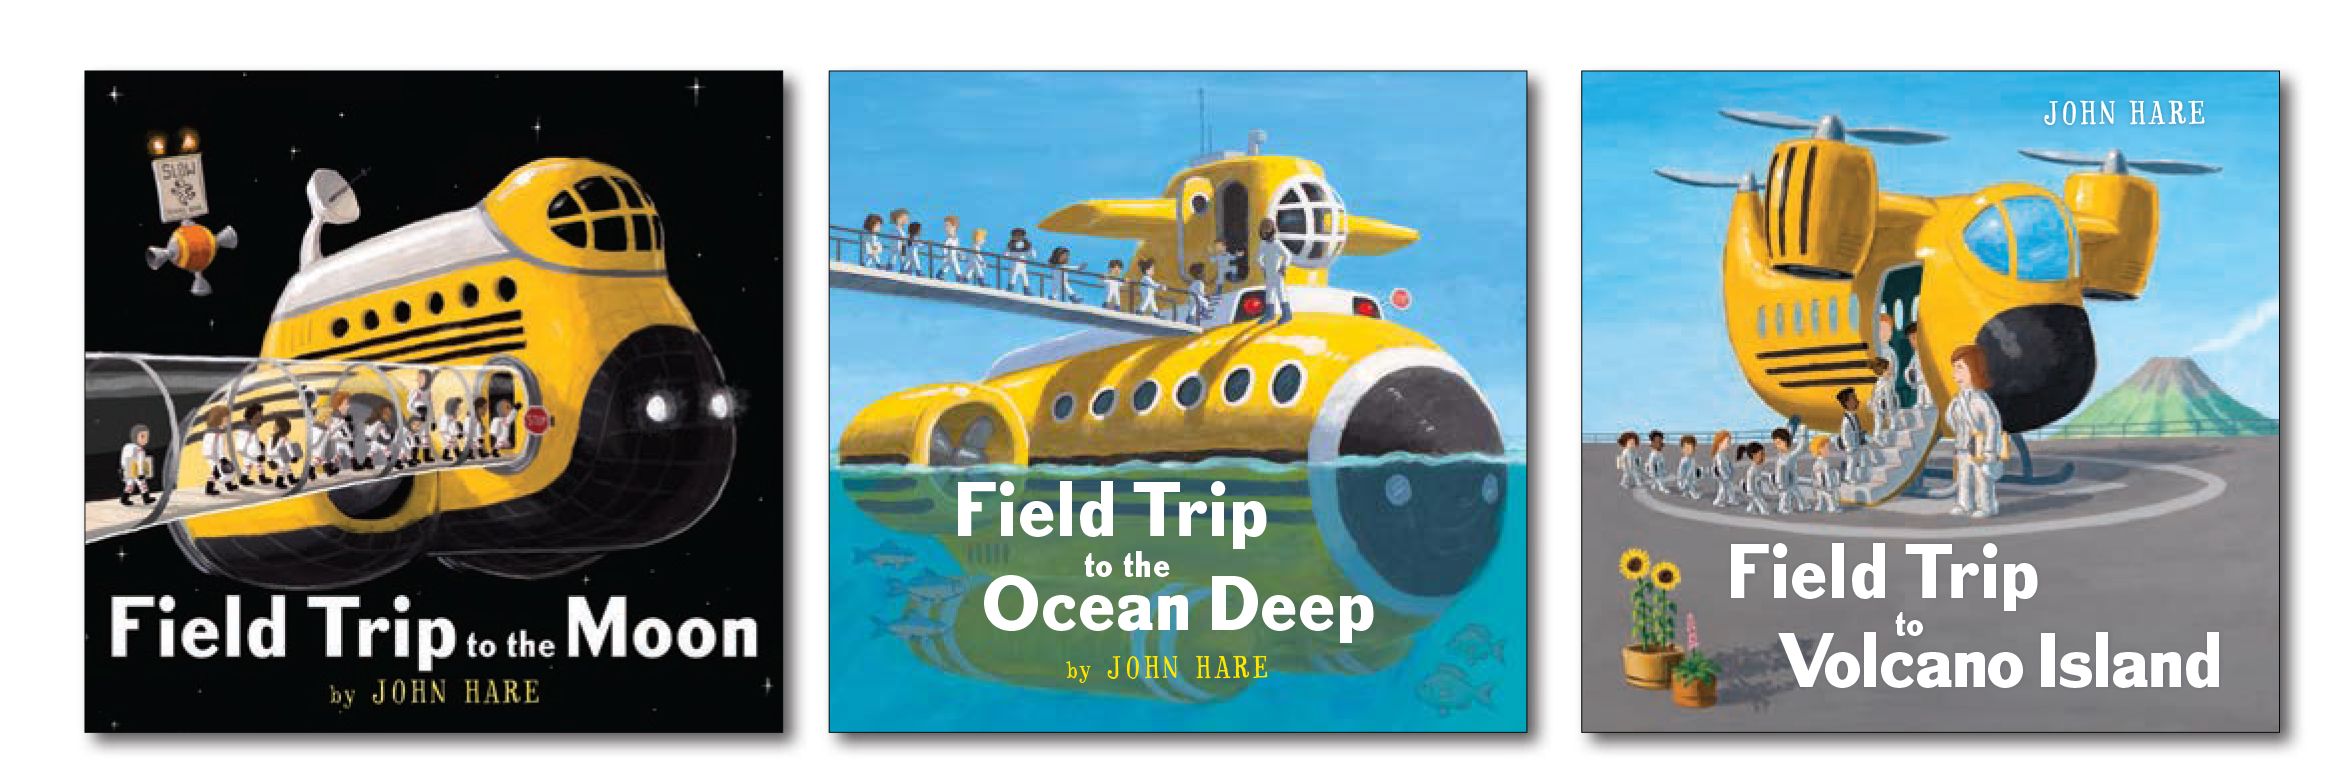 Three book covers in a row: Field Trip to the Moon, Field Trip to the Ocean Deep, and Field Trip to Volcano Island by John Hare